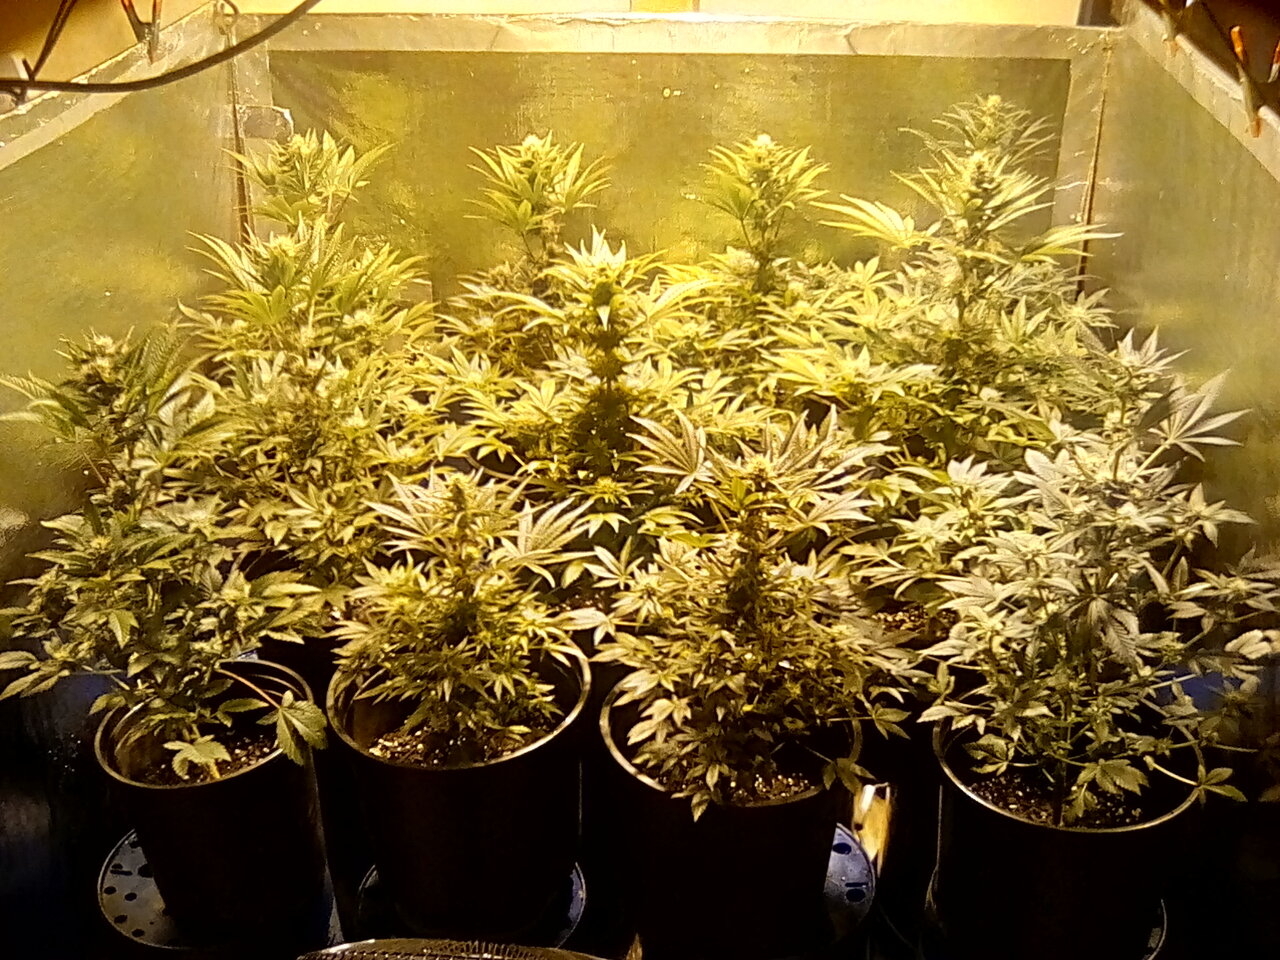 Day 32 of the flip.